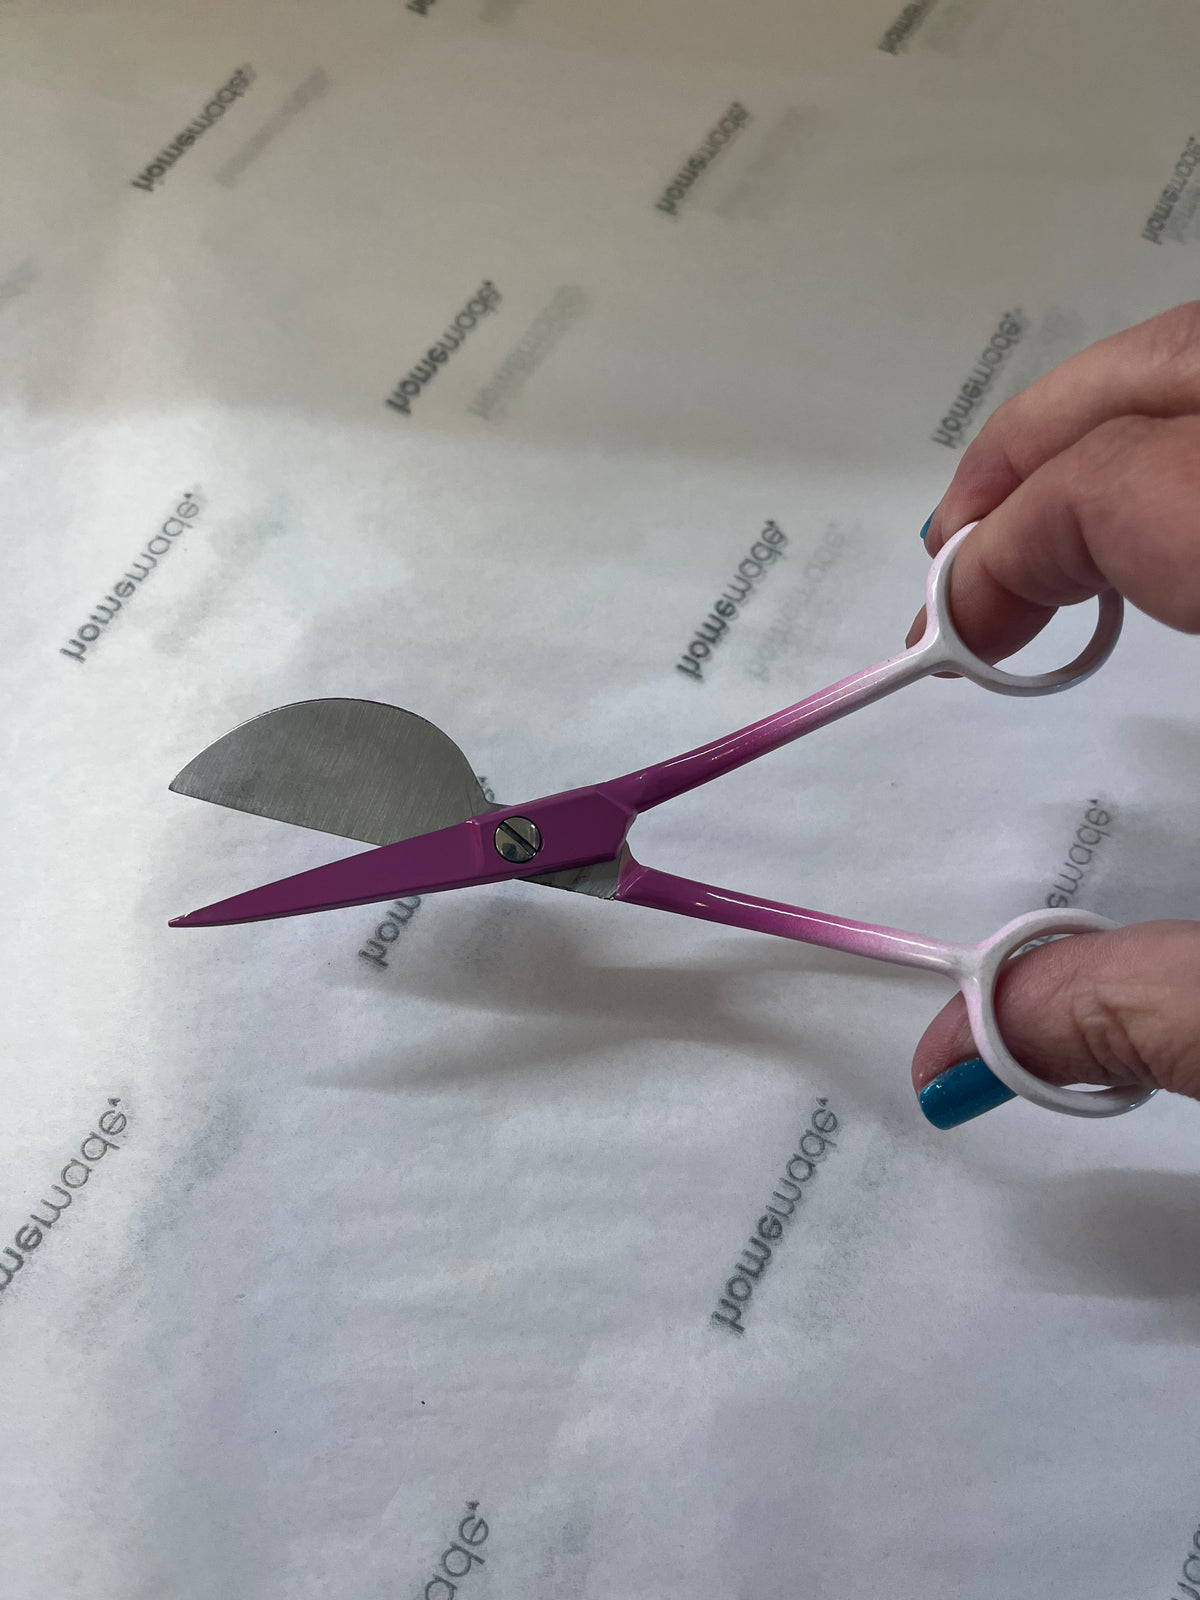 Duckbill  Scissors - with Homemade symbol in Pink